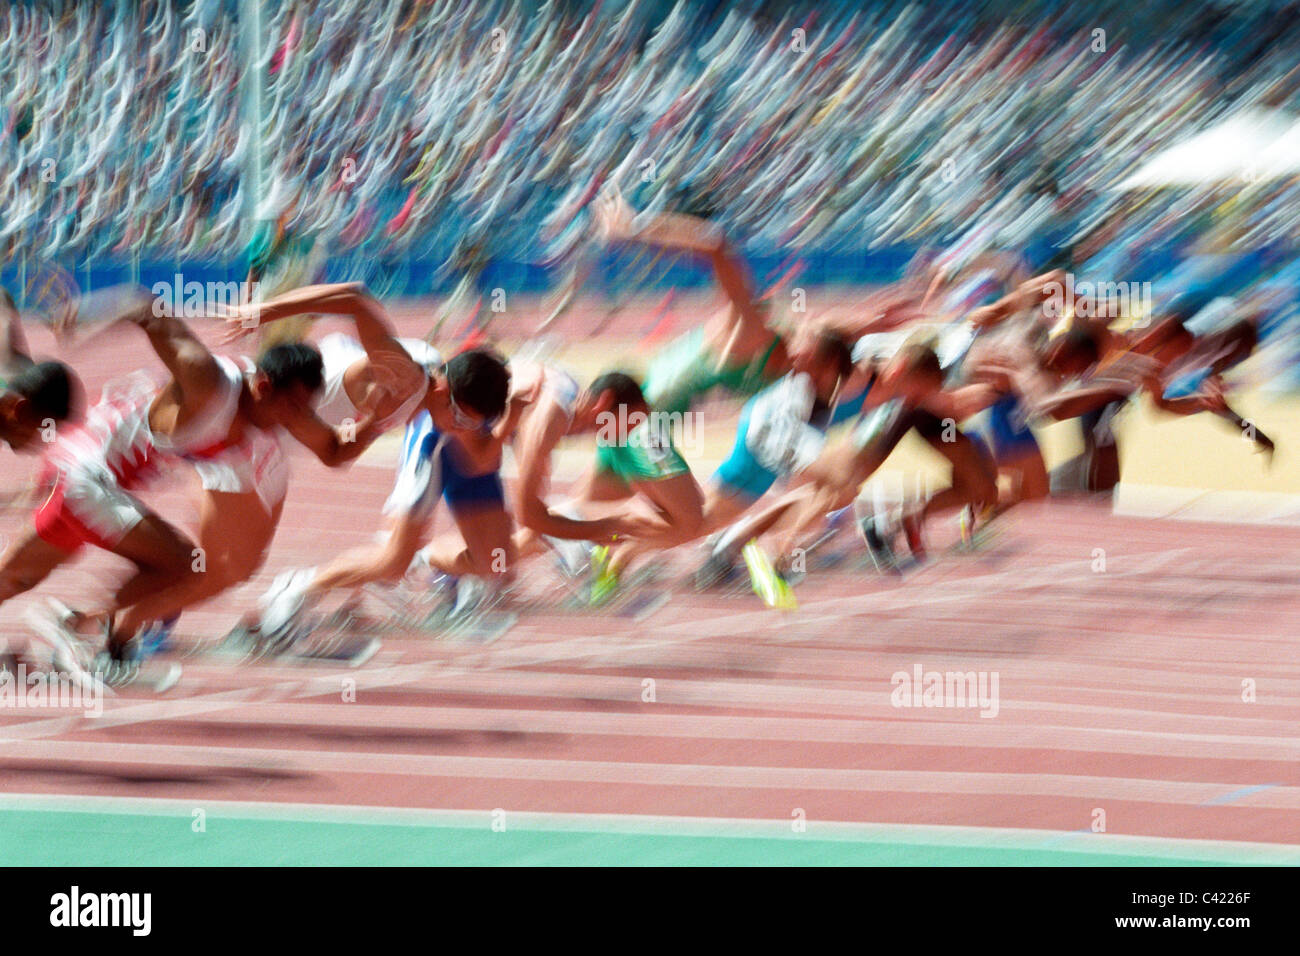 Blurred action at the start of a mens 100 meter track and field race. Stock Photo